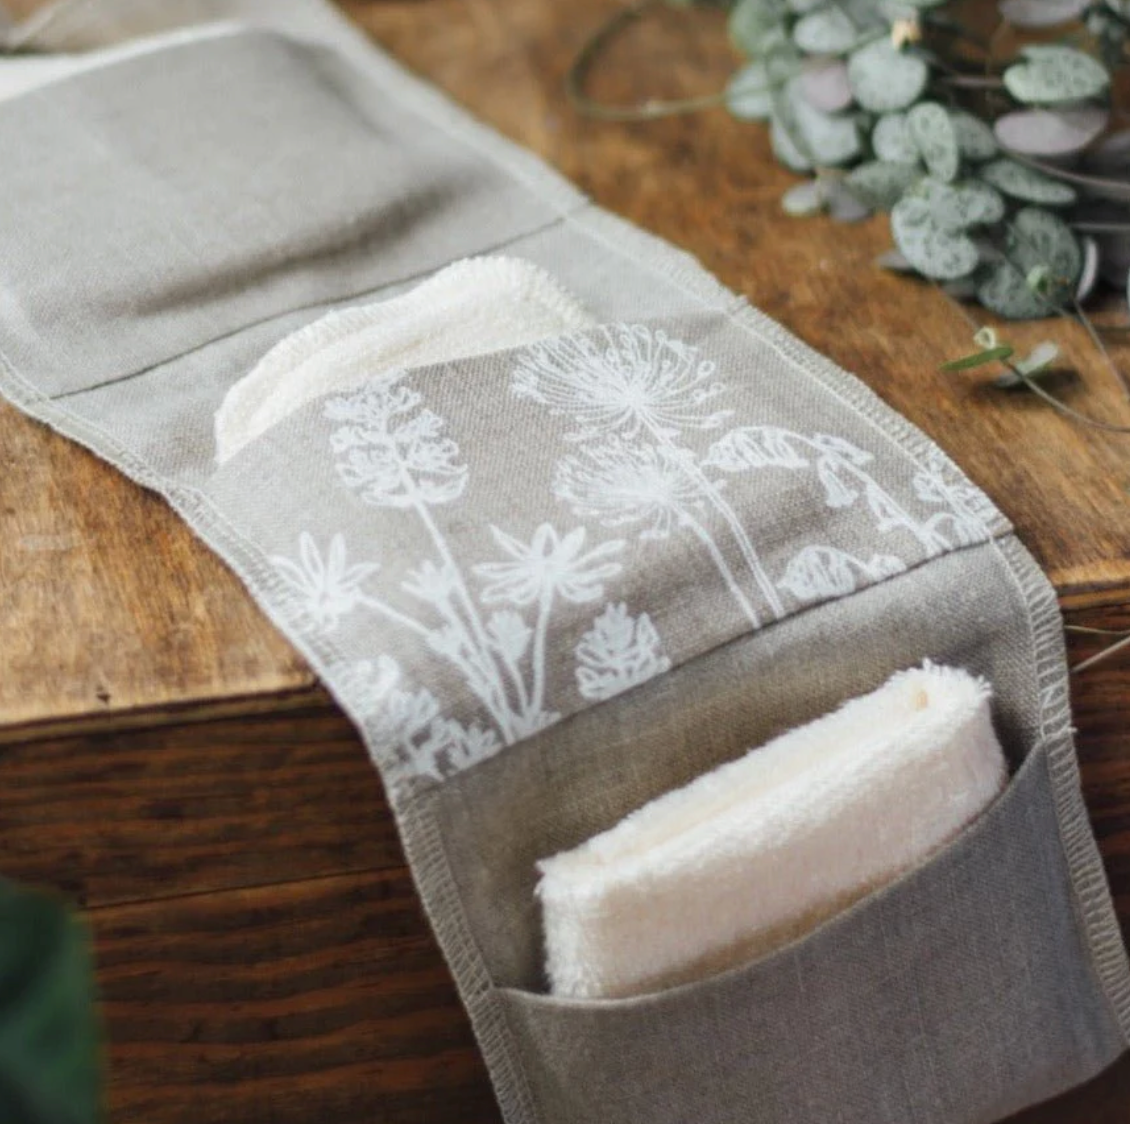 Reusable Bamboo Face Wipes Kit by Helen Round